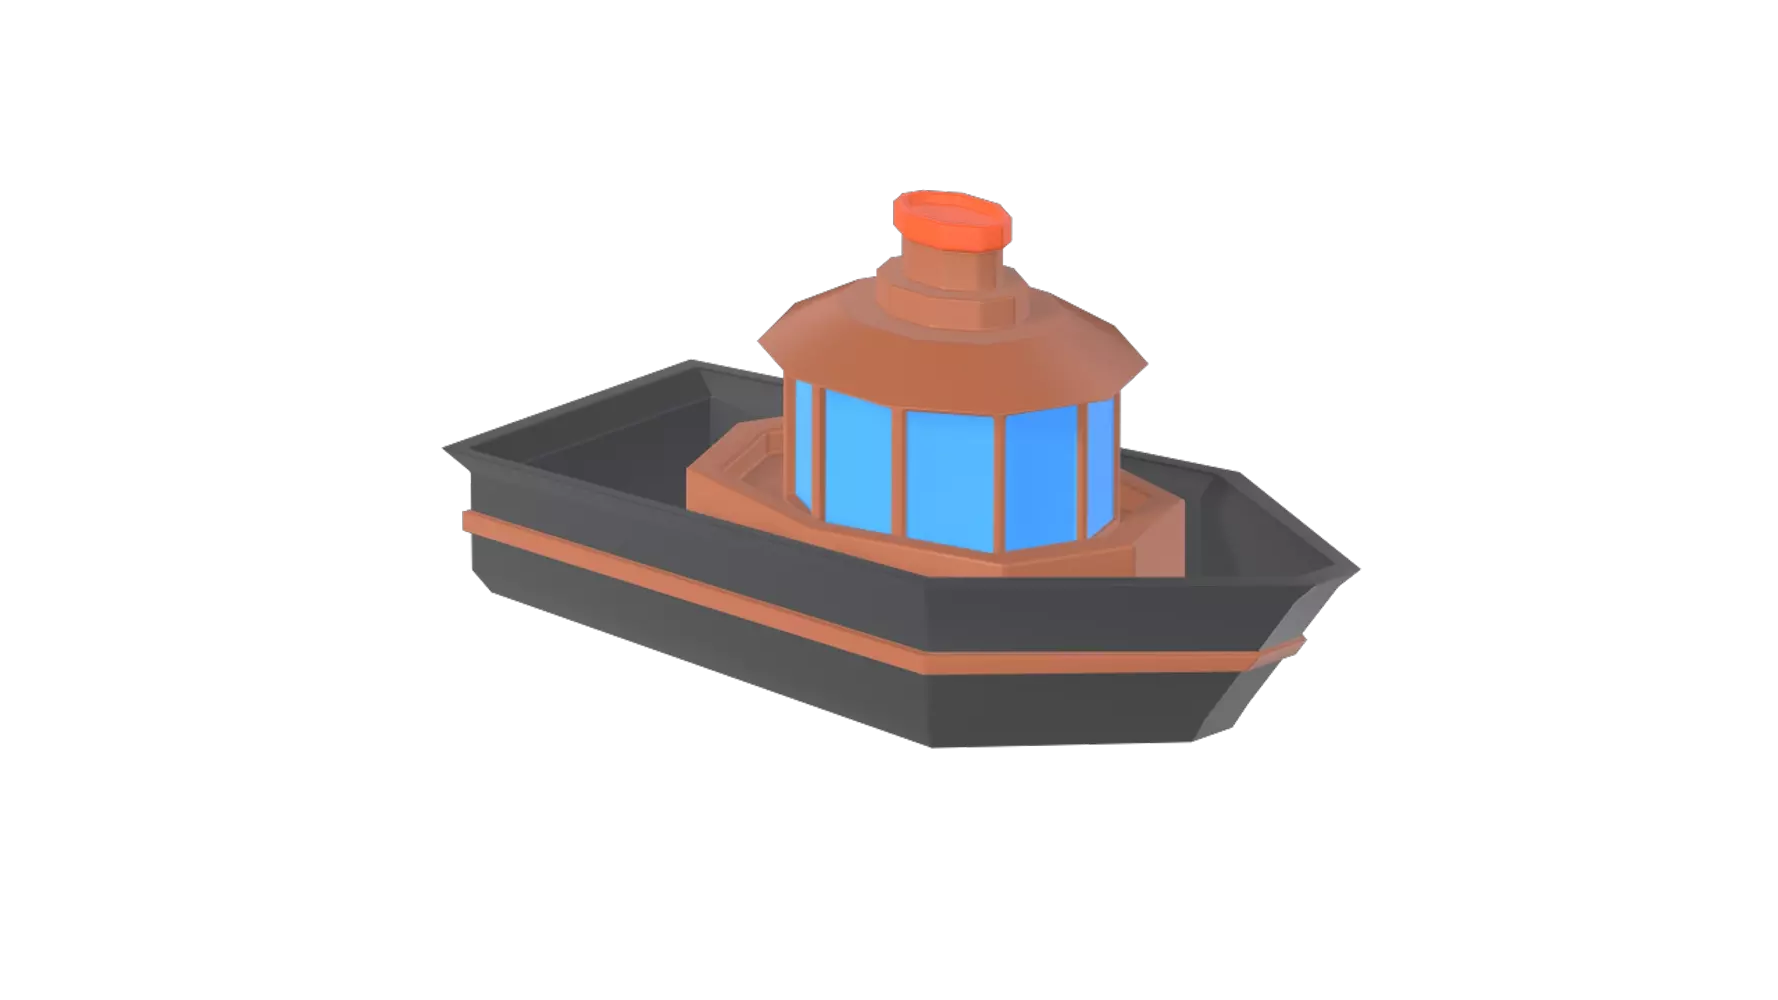 Fishing Boat 3D Graphic